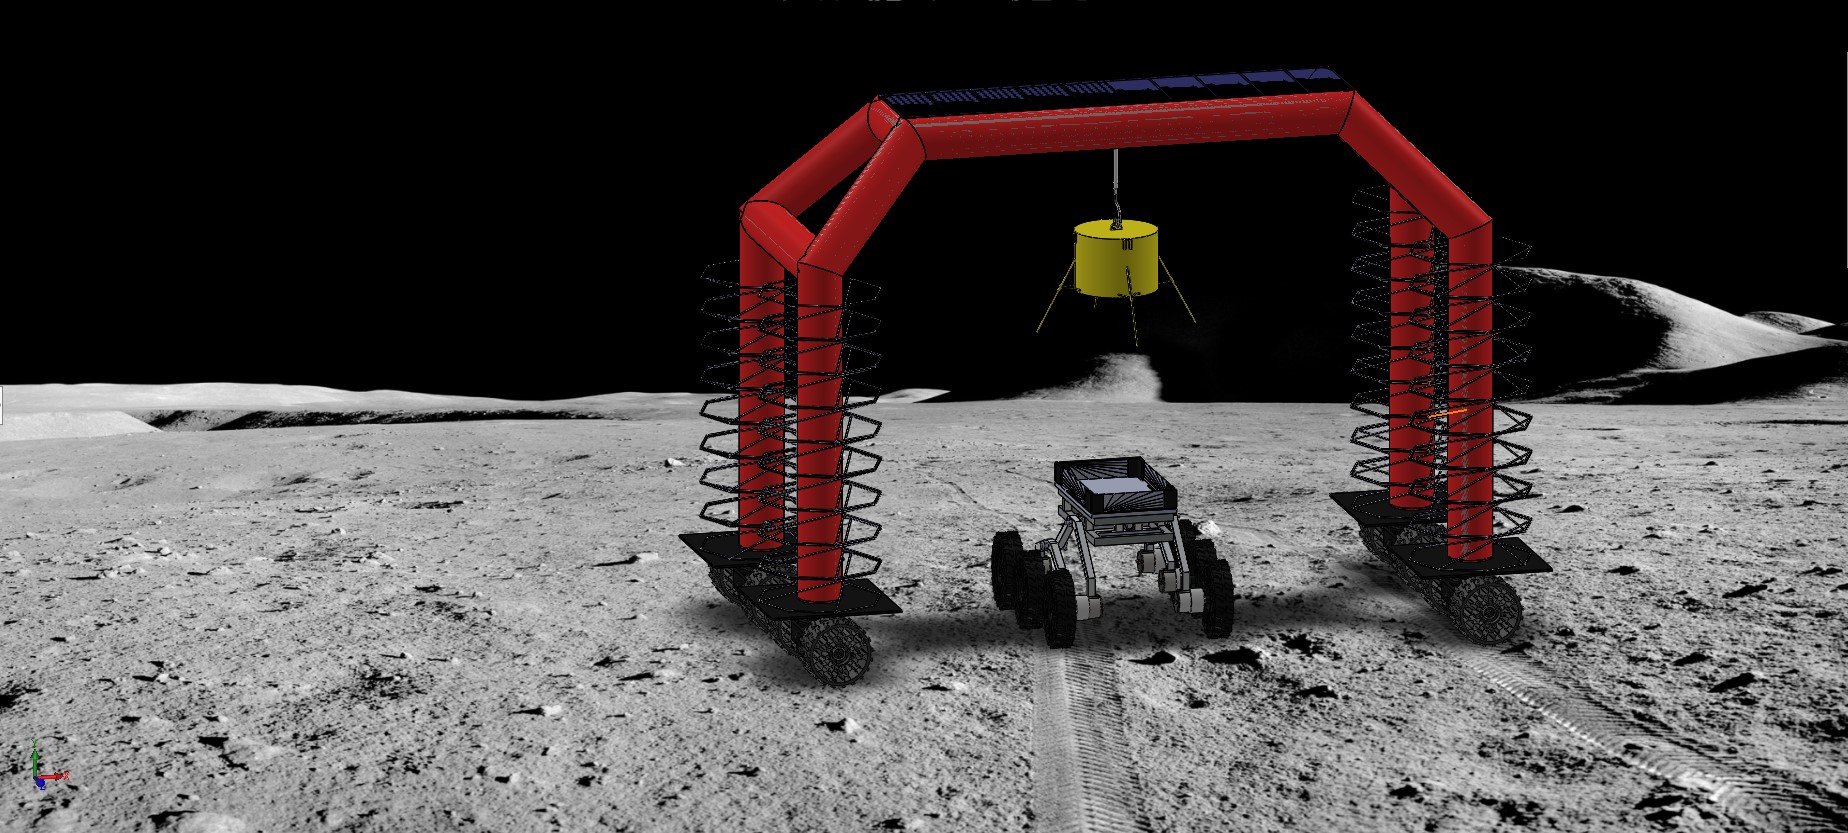 The Transporter and Gantry is one of three third-place winners for NASA's Lunar Delivery Challenge.